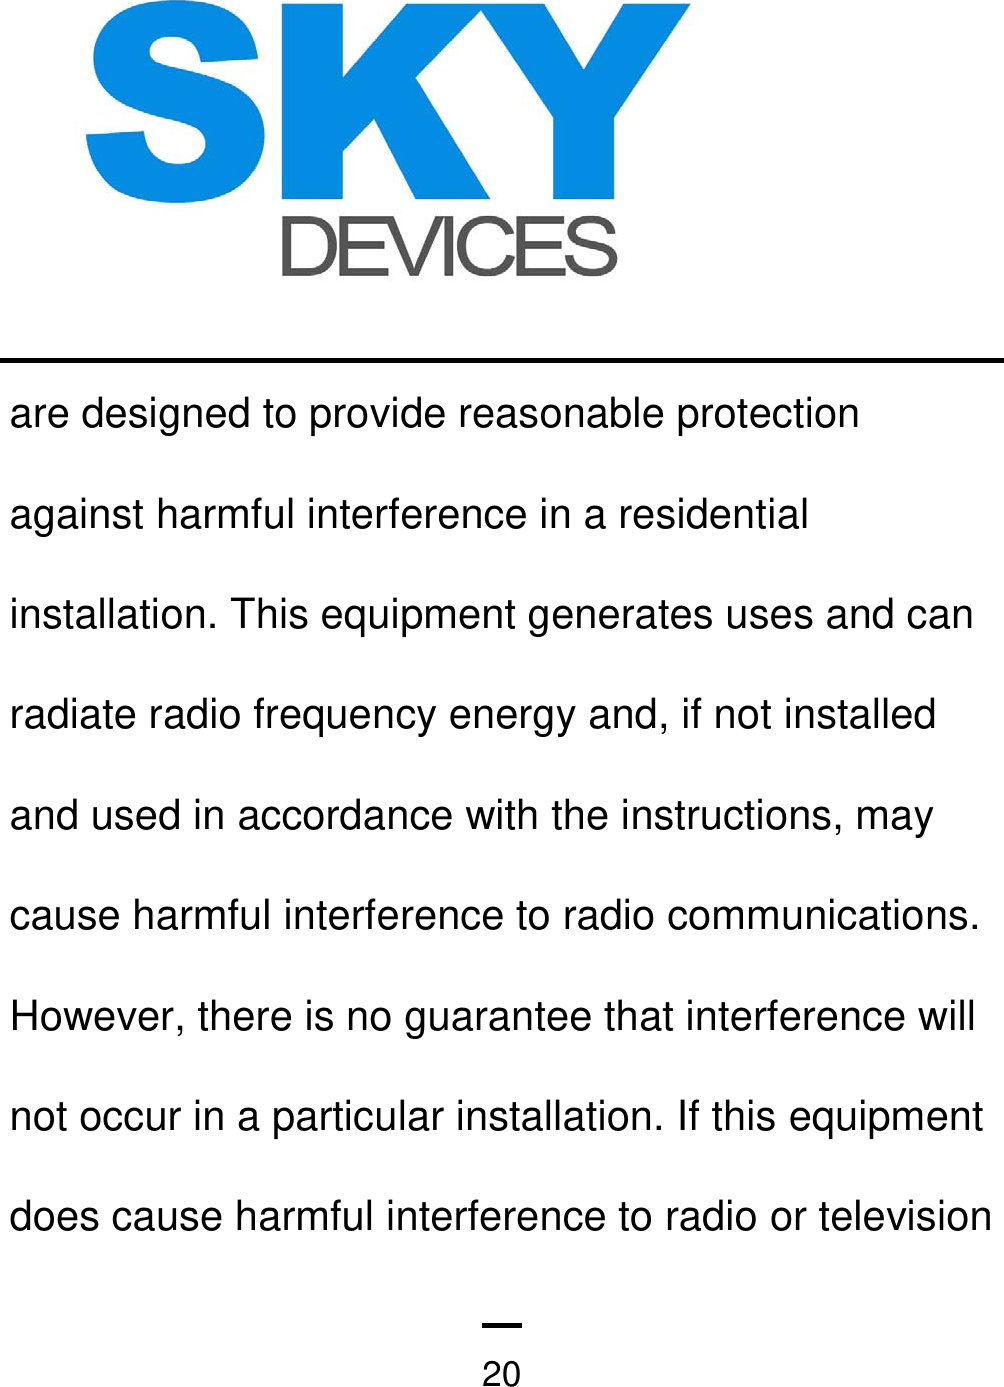   20are designed to provide reasonable protection against harmful interference in a residential installation. This equipment generates uses and can radiate radio frequency energy and, if not installed and used in accordance with the instructions, may cause harmful interference to radio communications. However, there is no guarantee that interference will not occur in a particular installation. If this equipment does cause harmful interference to radio or television 